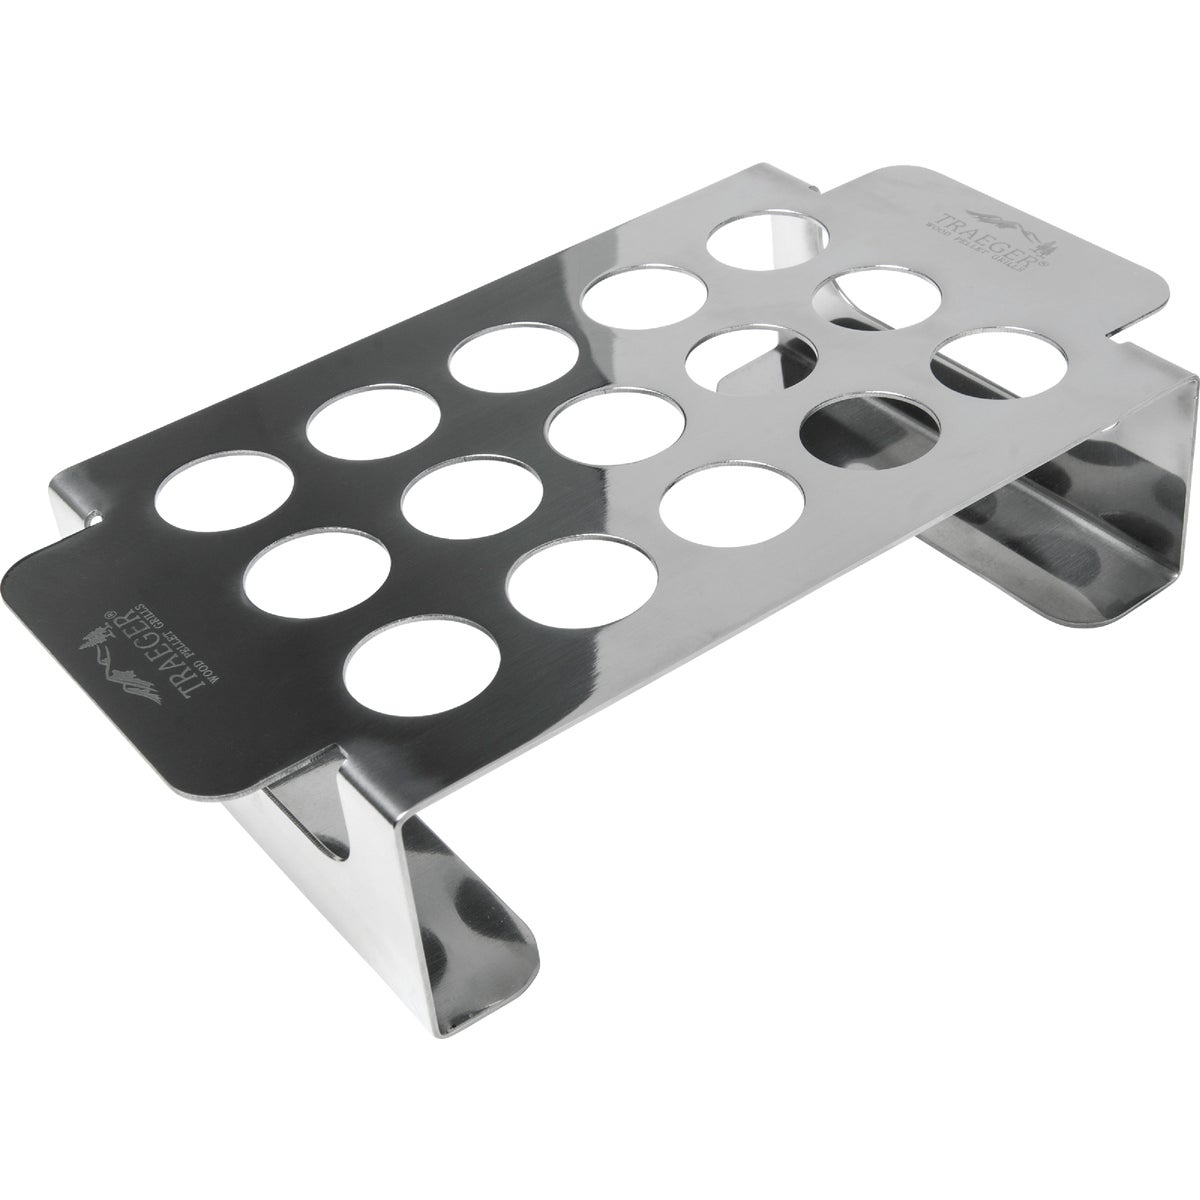 Item 800662, Stainless steel jalapeno popper tray holds up to 15 peppers - stuffed, 